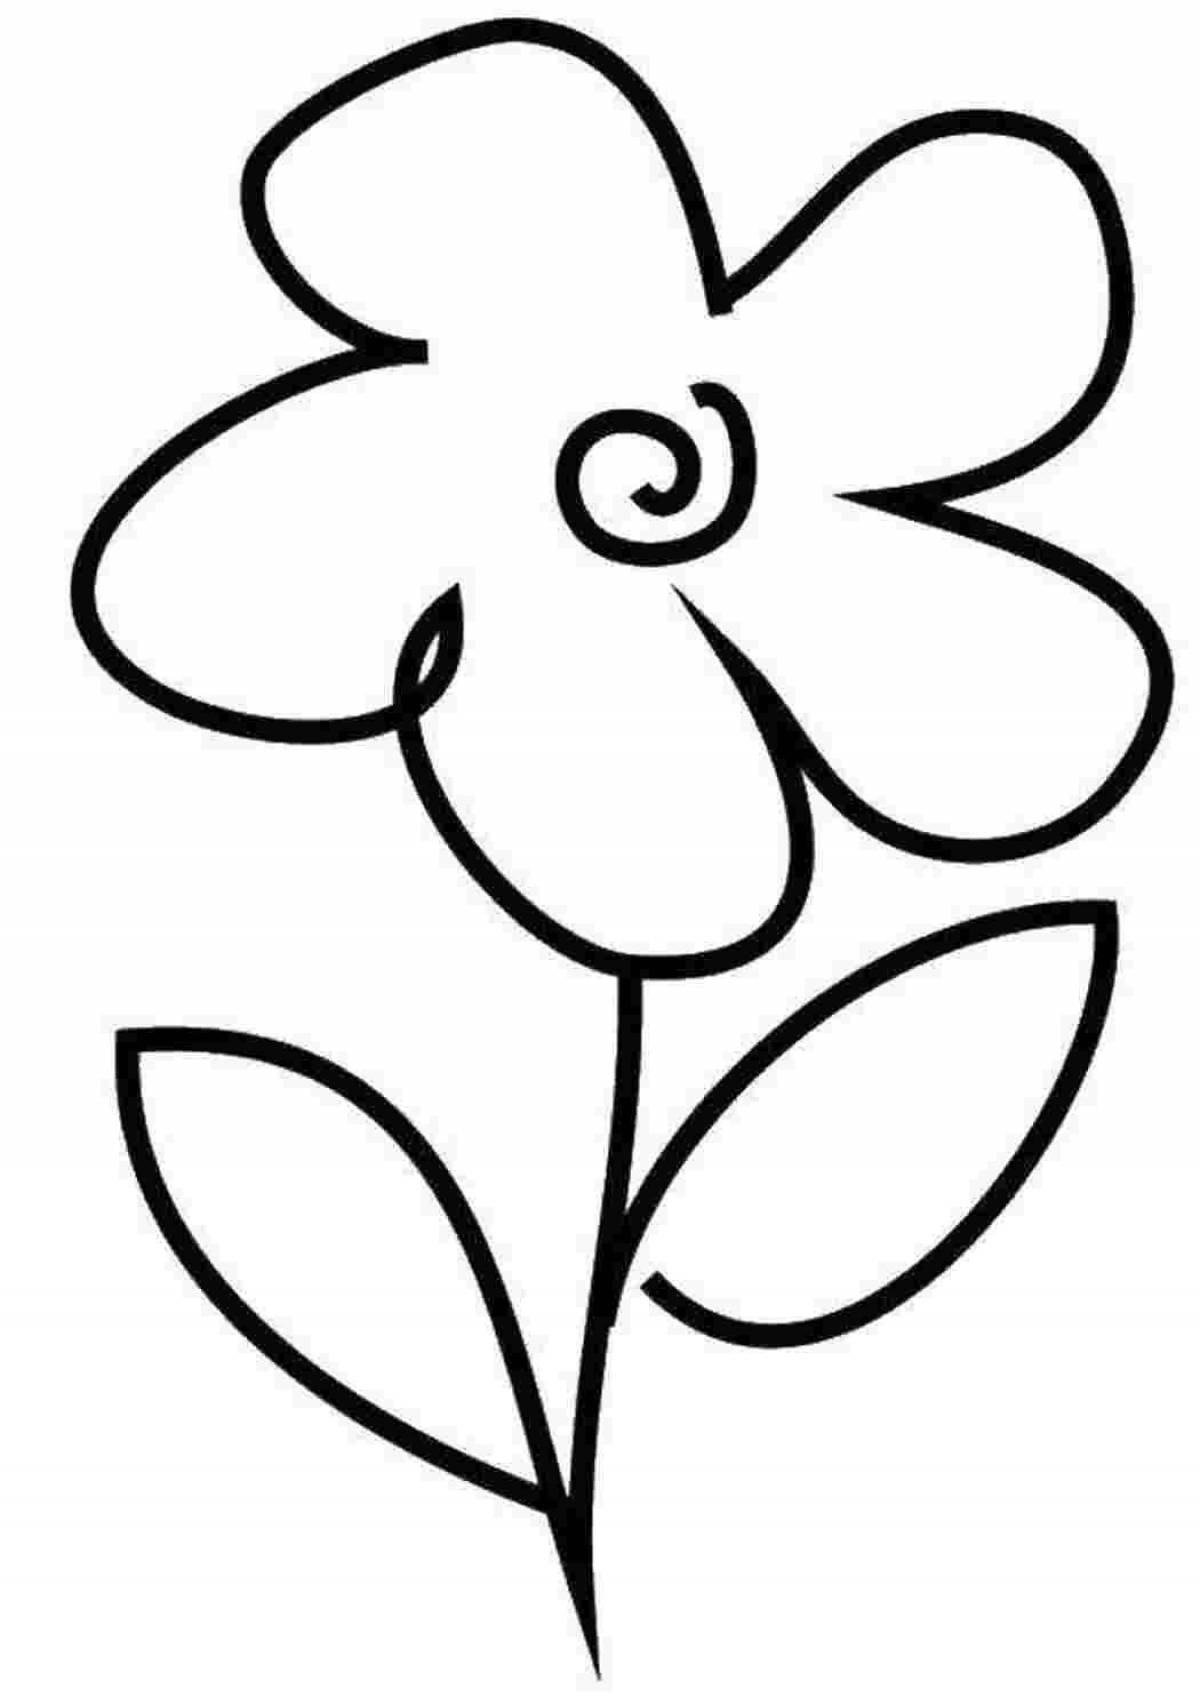 Fun drawing of flowers for kids